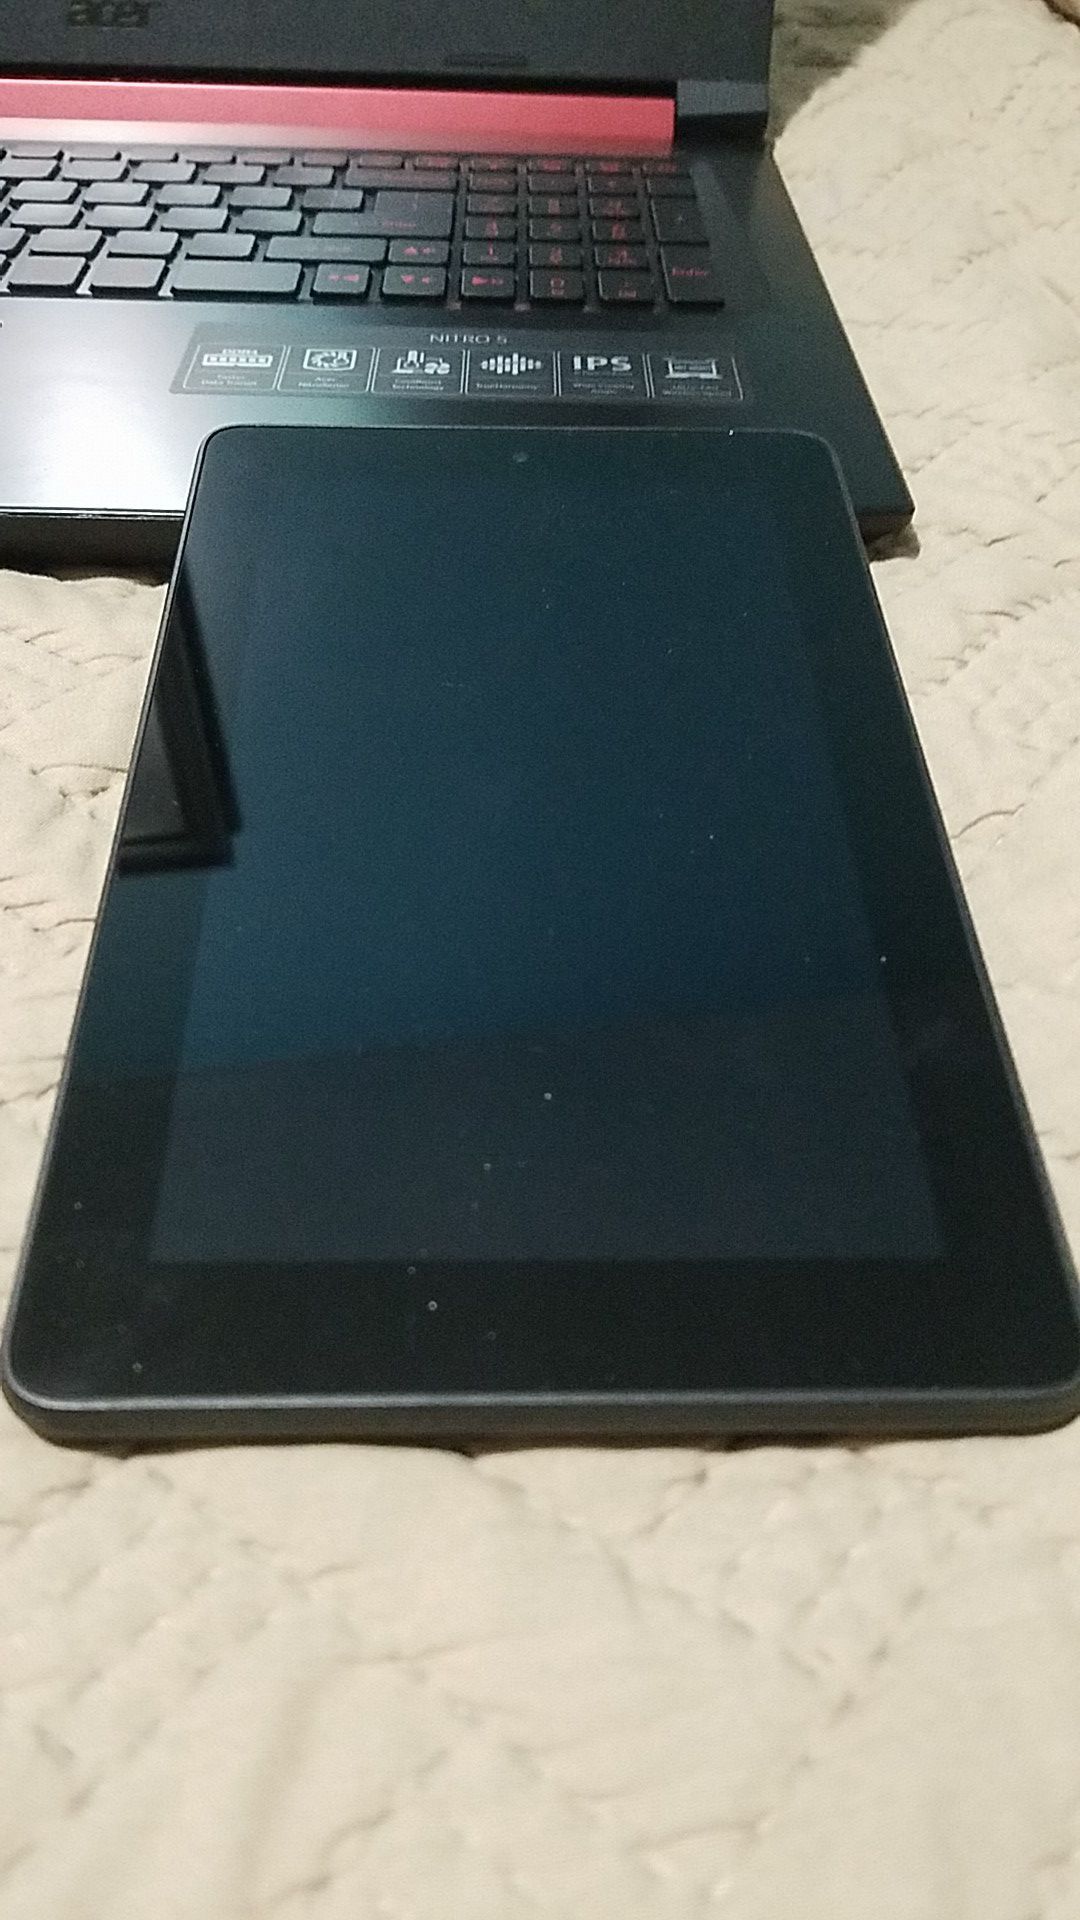 Amazon Fire 7" Tablet (5th Generation)